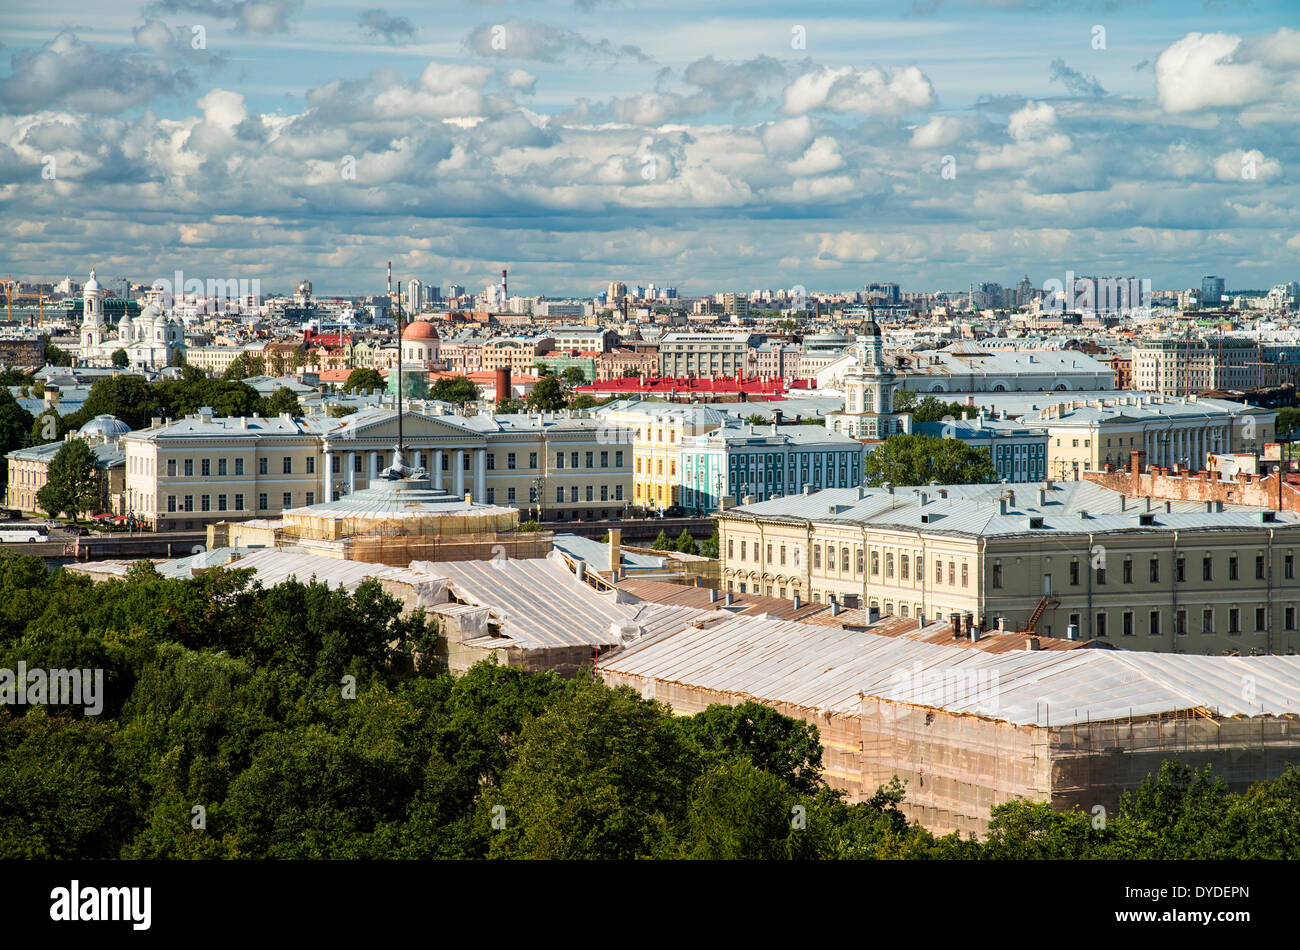 Views over Saint Petersburg from the top of Saint Isaac's Cathedral. Stock Photo